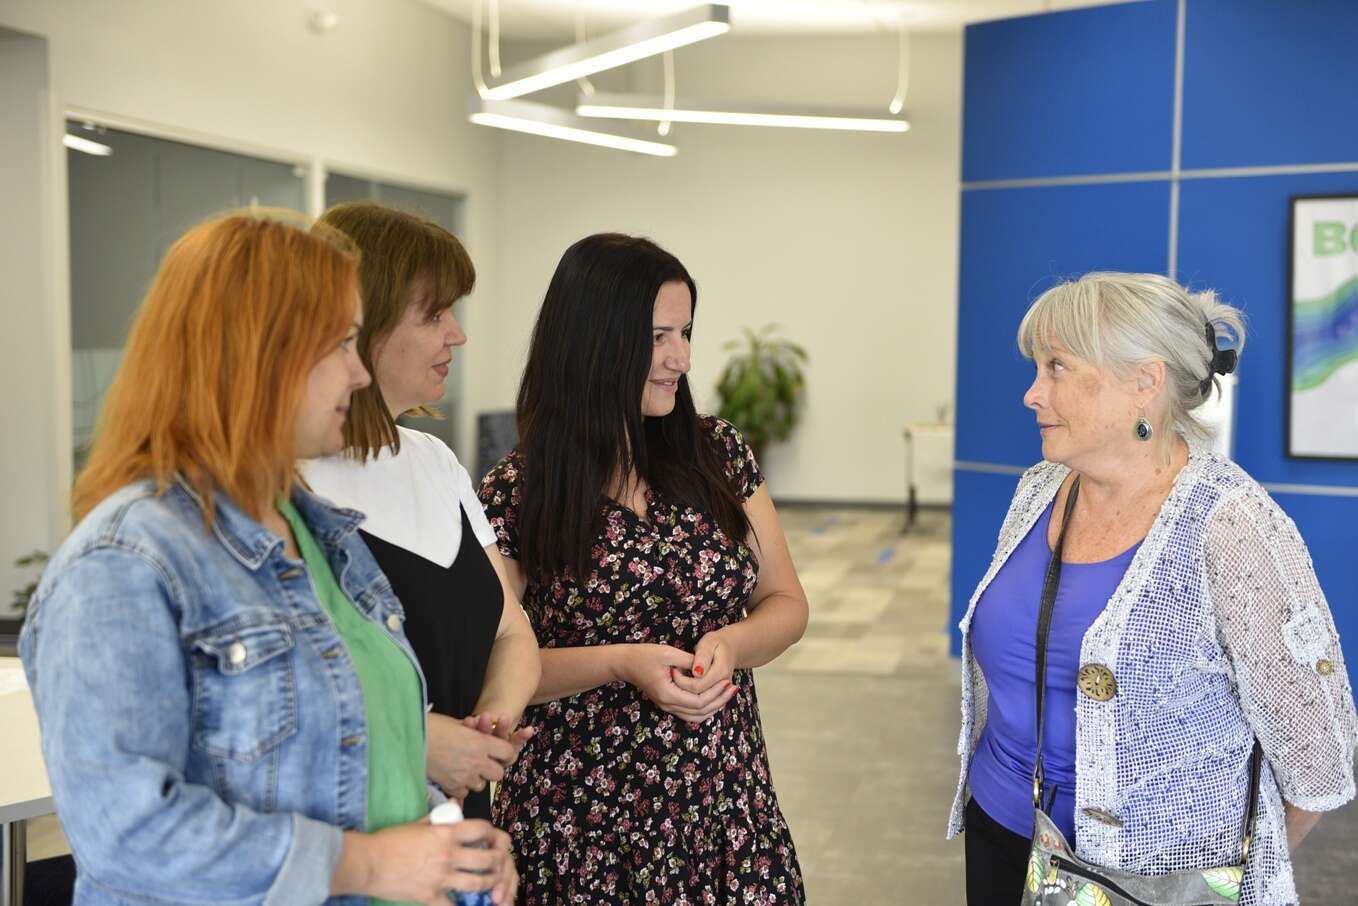 Ukrainian students speak with an English as a second language instructor at Butler County Community College